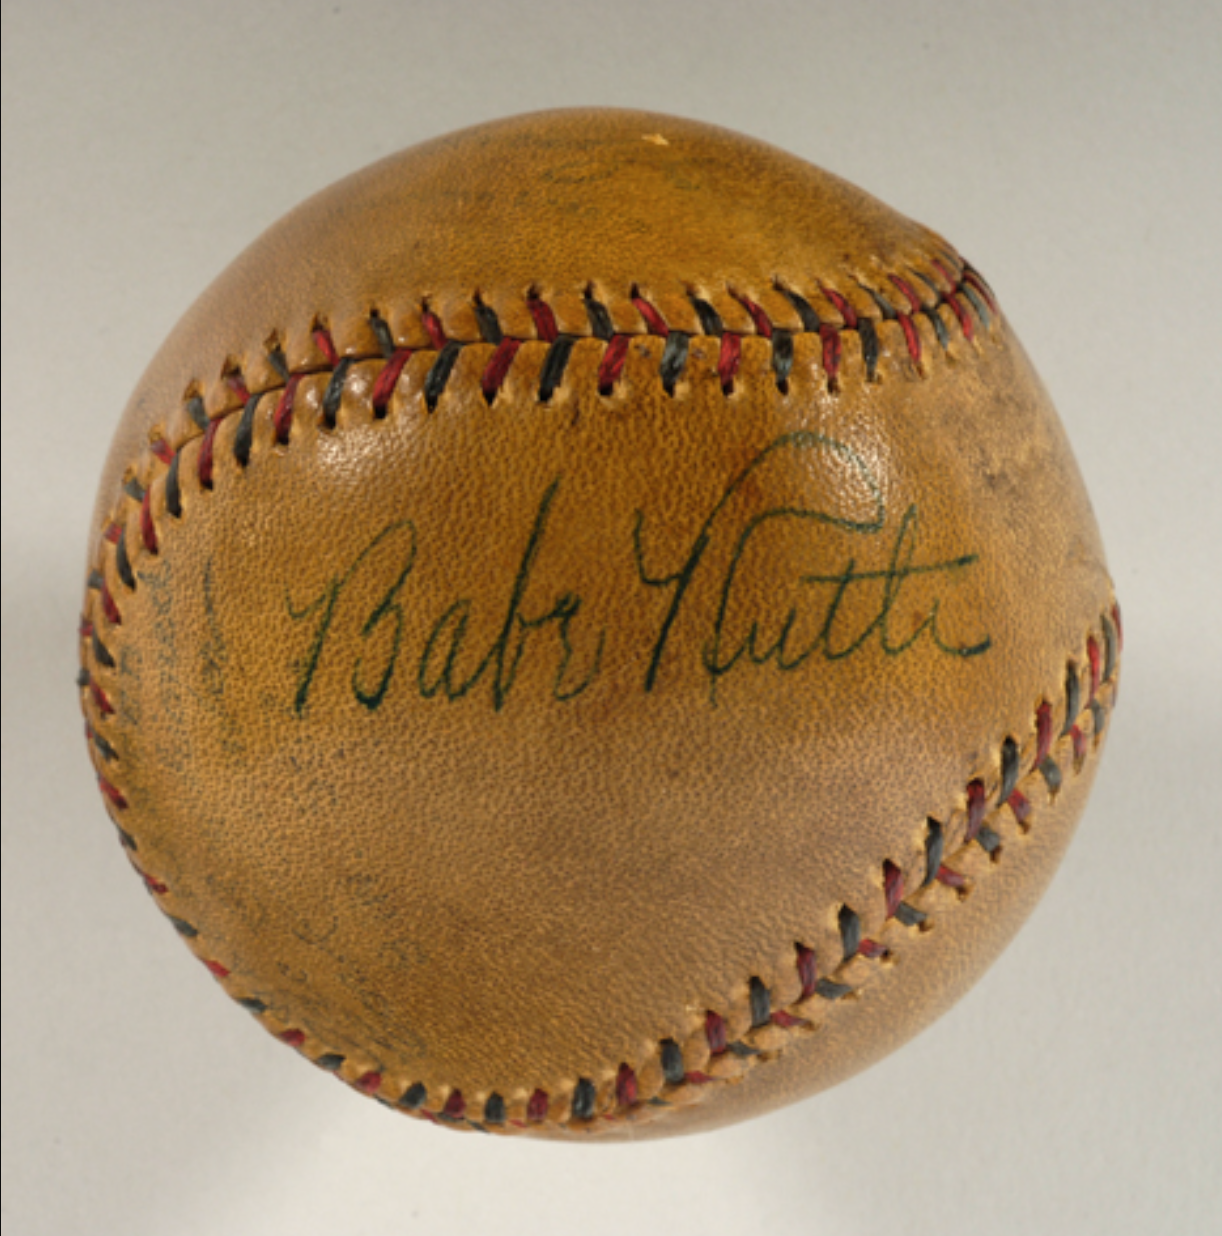 Home run baseball hit by Babe Ruth in the 1933 All-Star Game